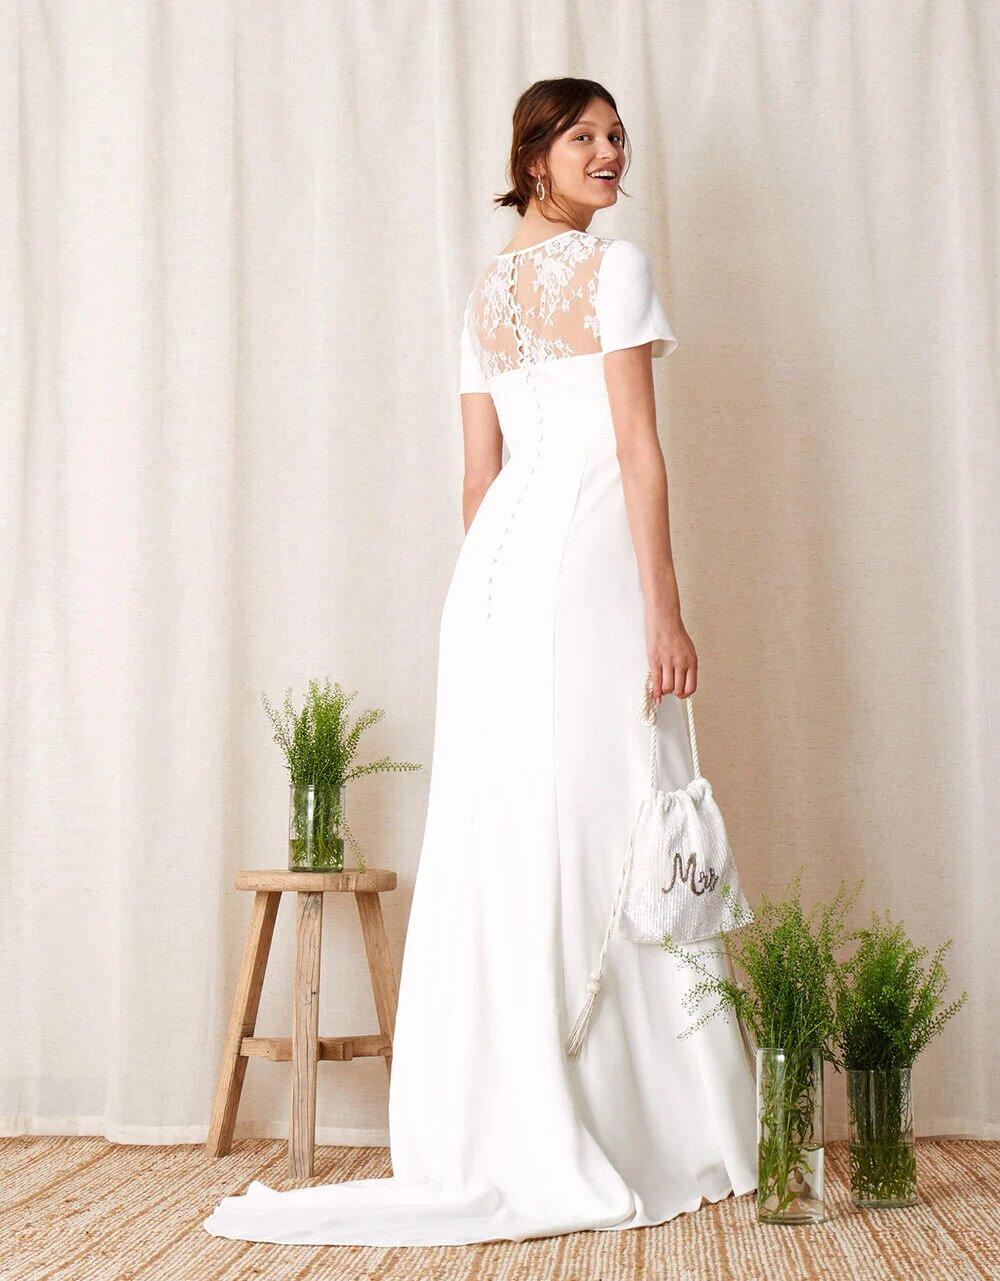 Model in a sleek wedding dress with lace panel 